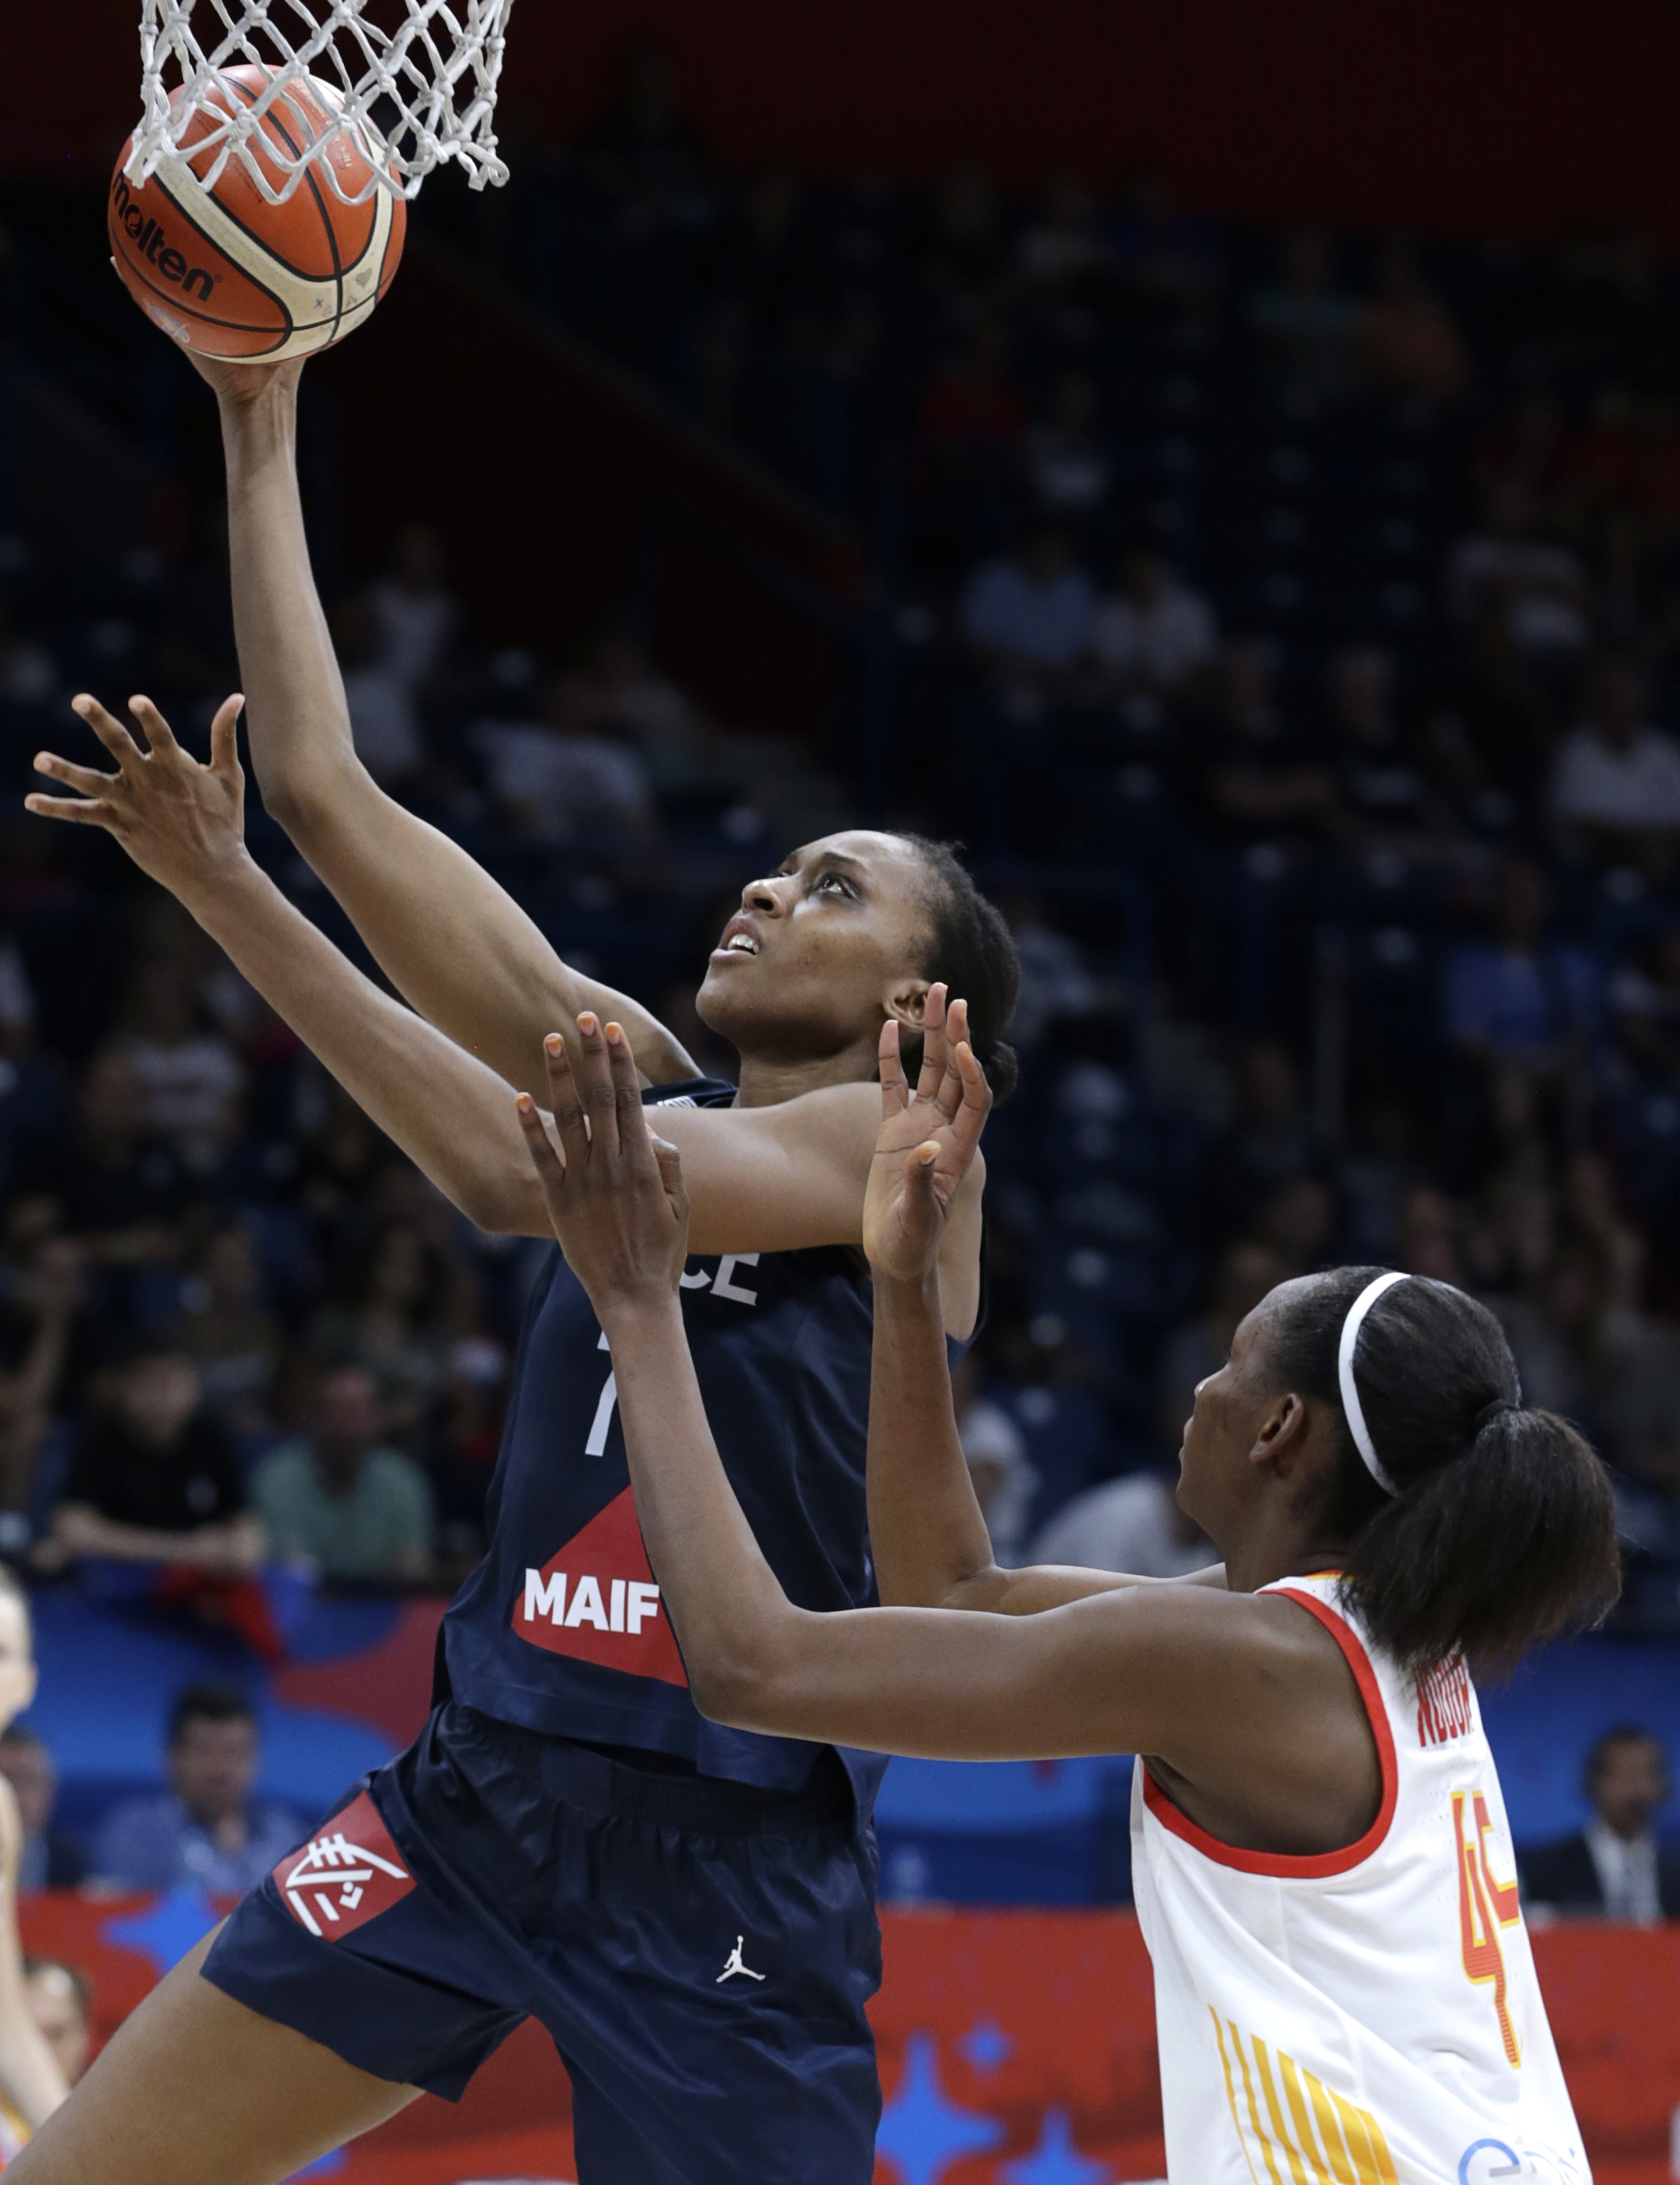 epa07702072 Sandrine Gruda (L) of France in action against Astou Ndour (R) of Spain during the FIBA Women's Eurobasket 2019 final match between Spain and France in Belgrade, Serbia, 07 July 2019.  EPA/ANDREJ CUKIC